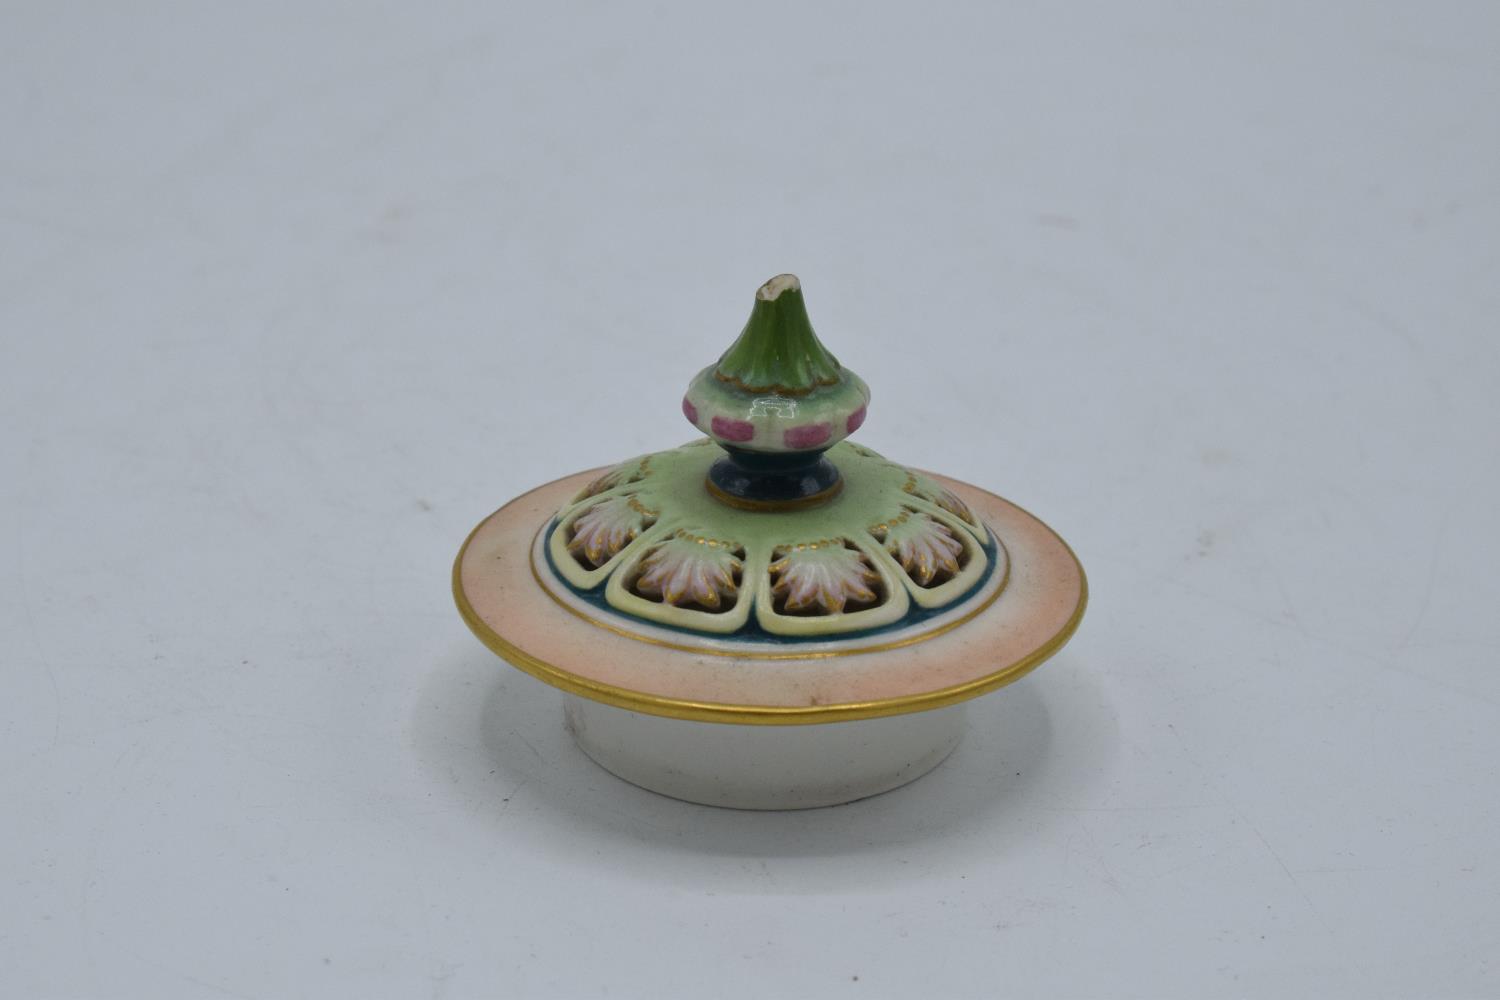 Hadley's Worcester faience lidded vase with a guilded floral decoration. In good condition with no - Image 4 of 4